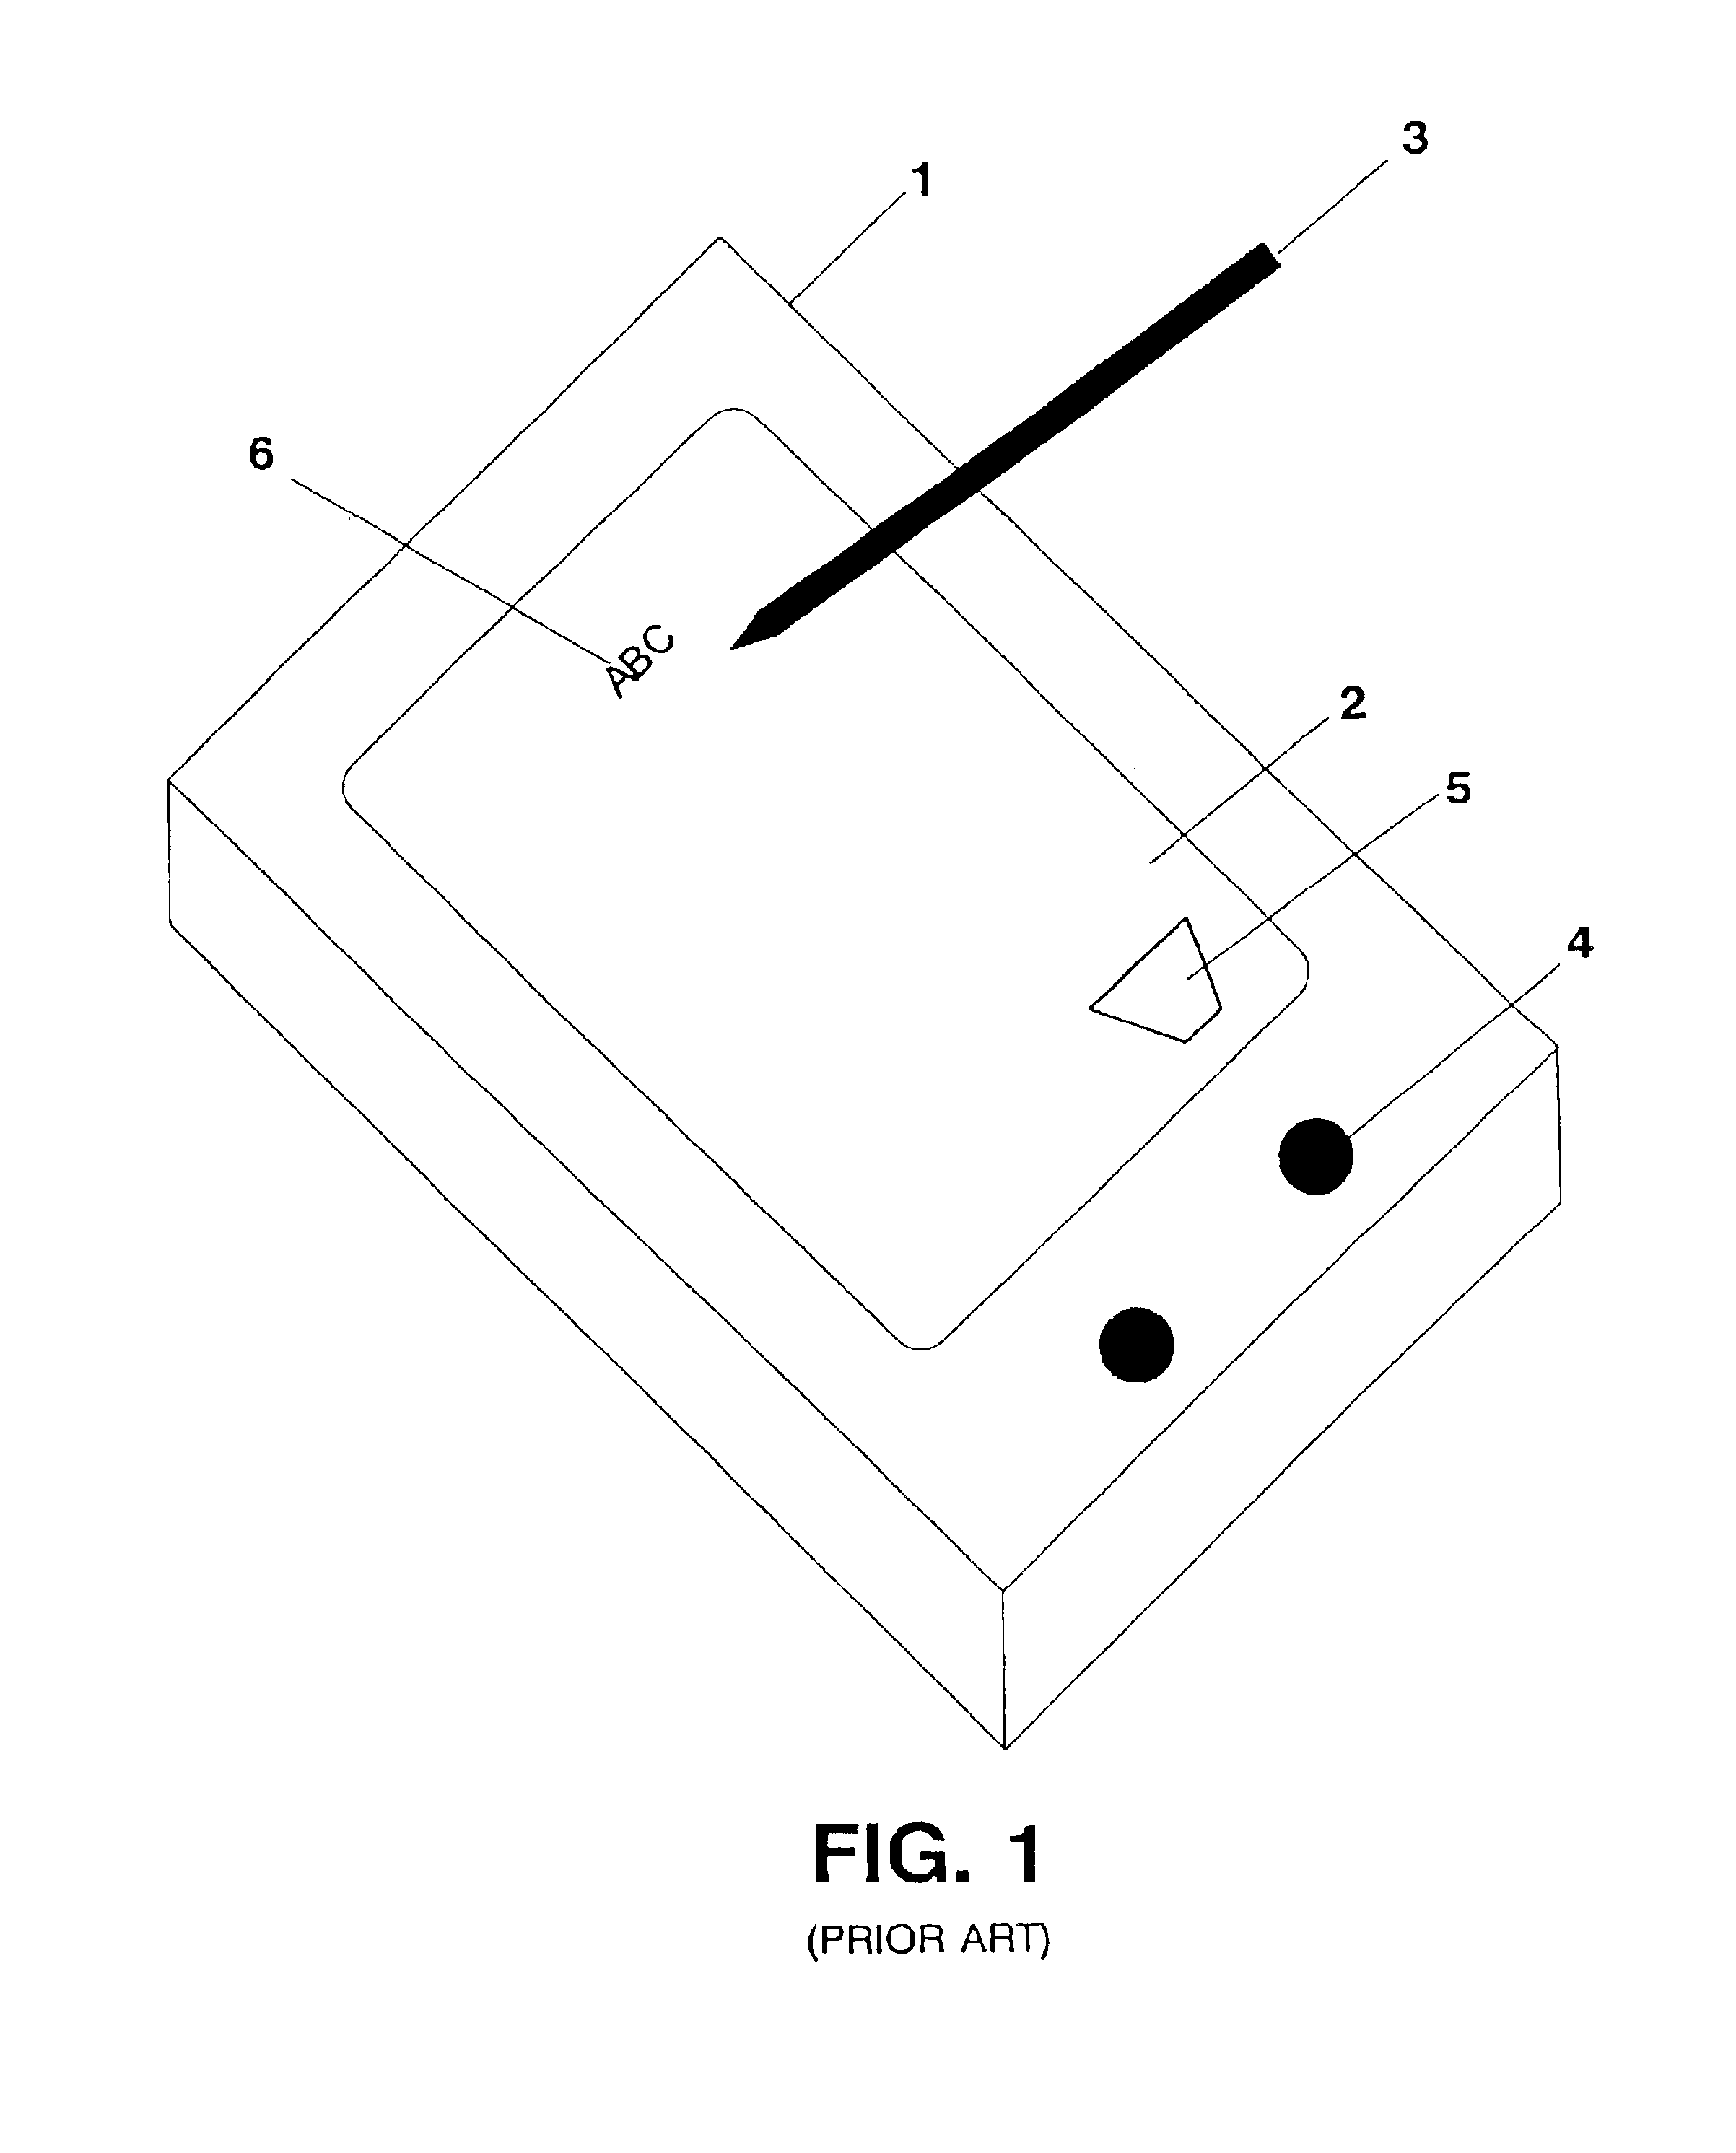 Multiple pen stroke character set and handwriting recognition system with immediate response